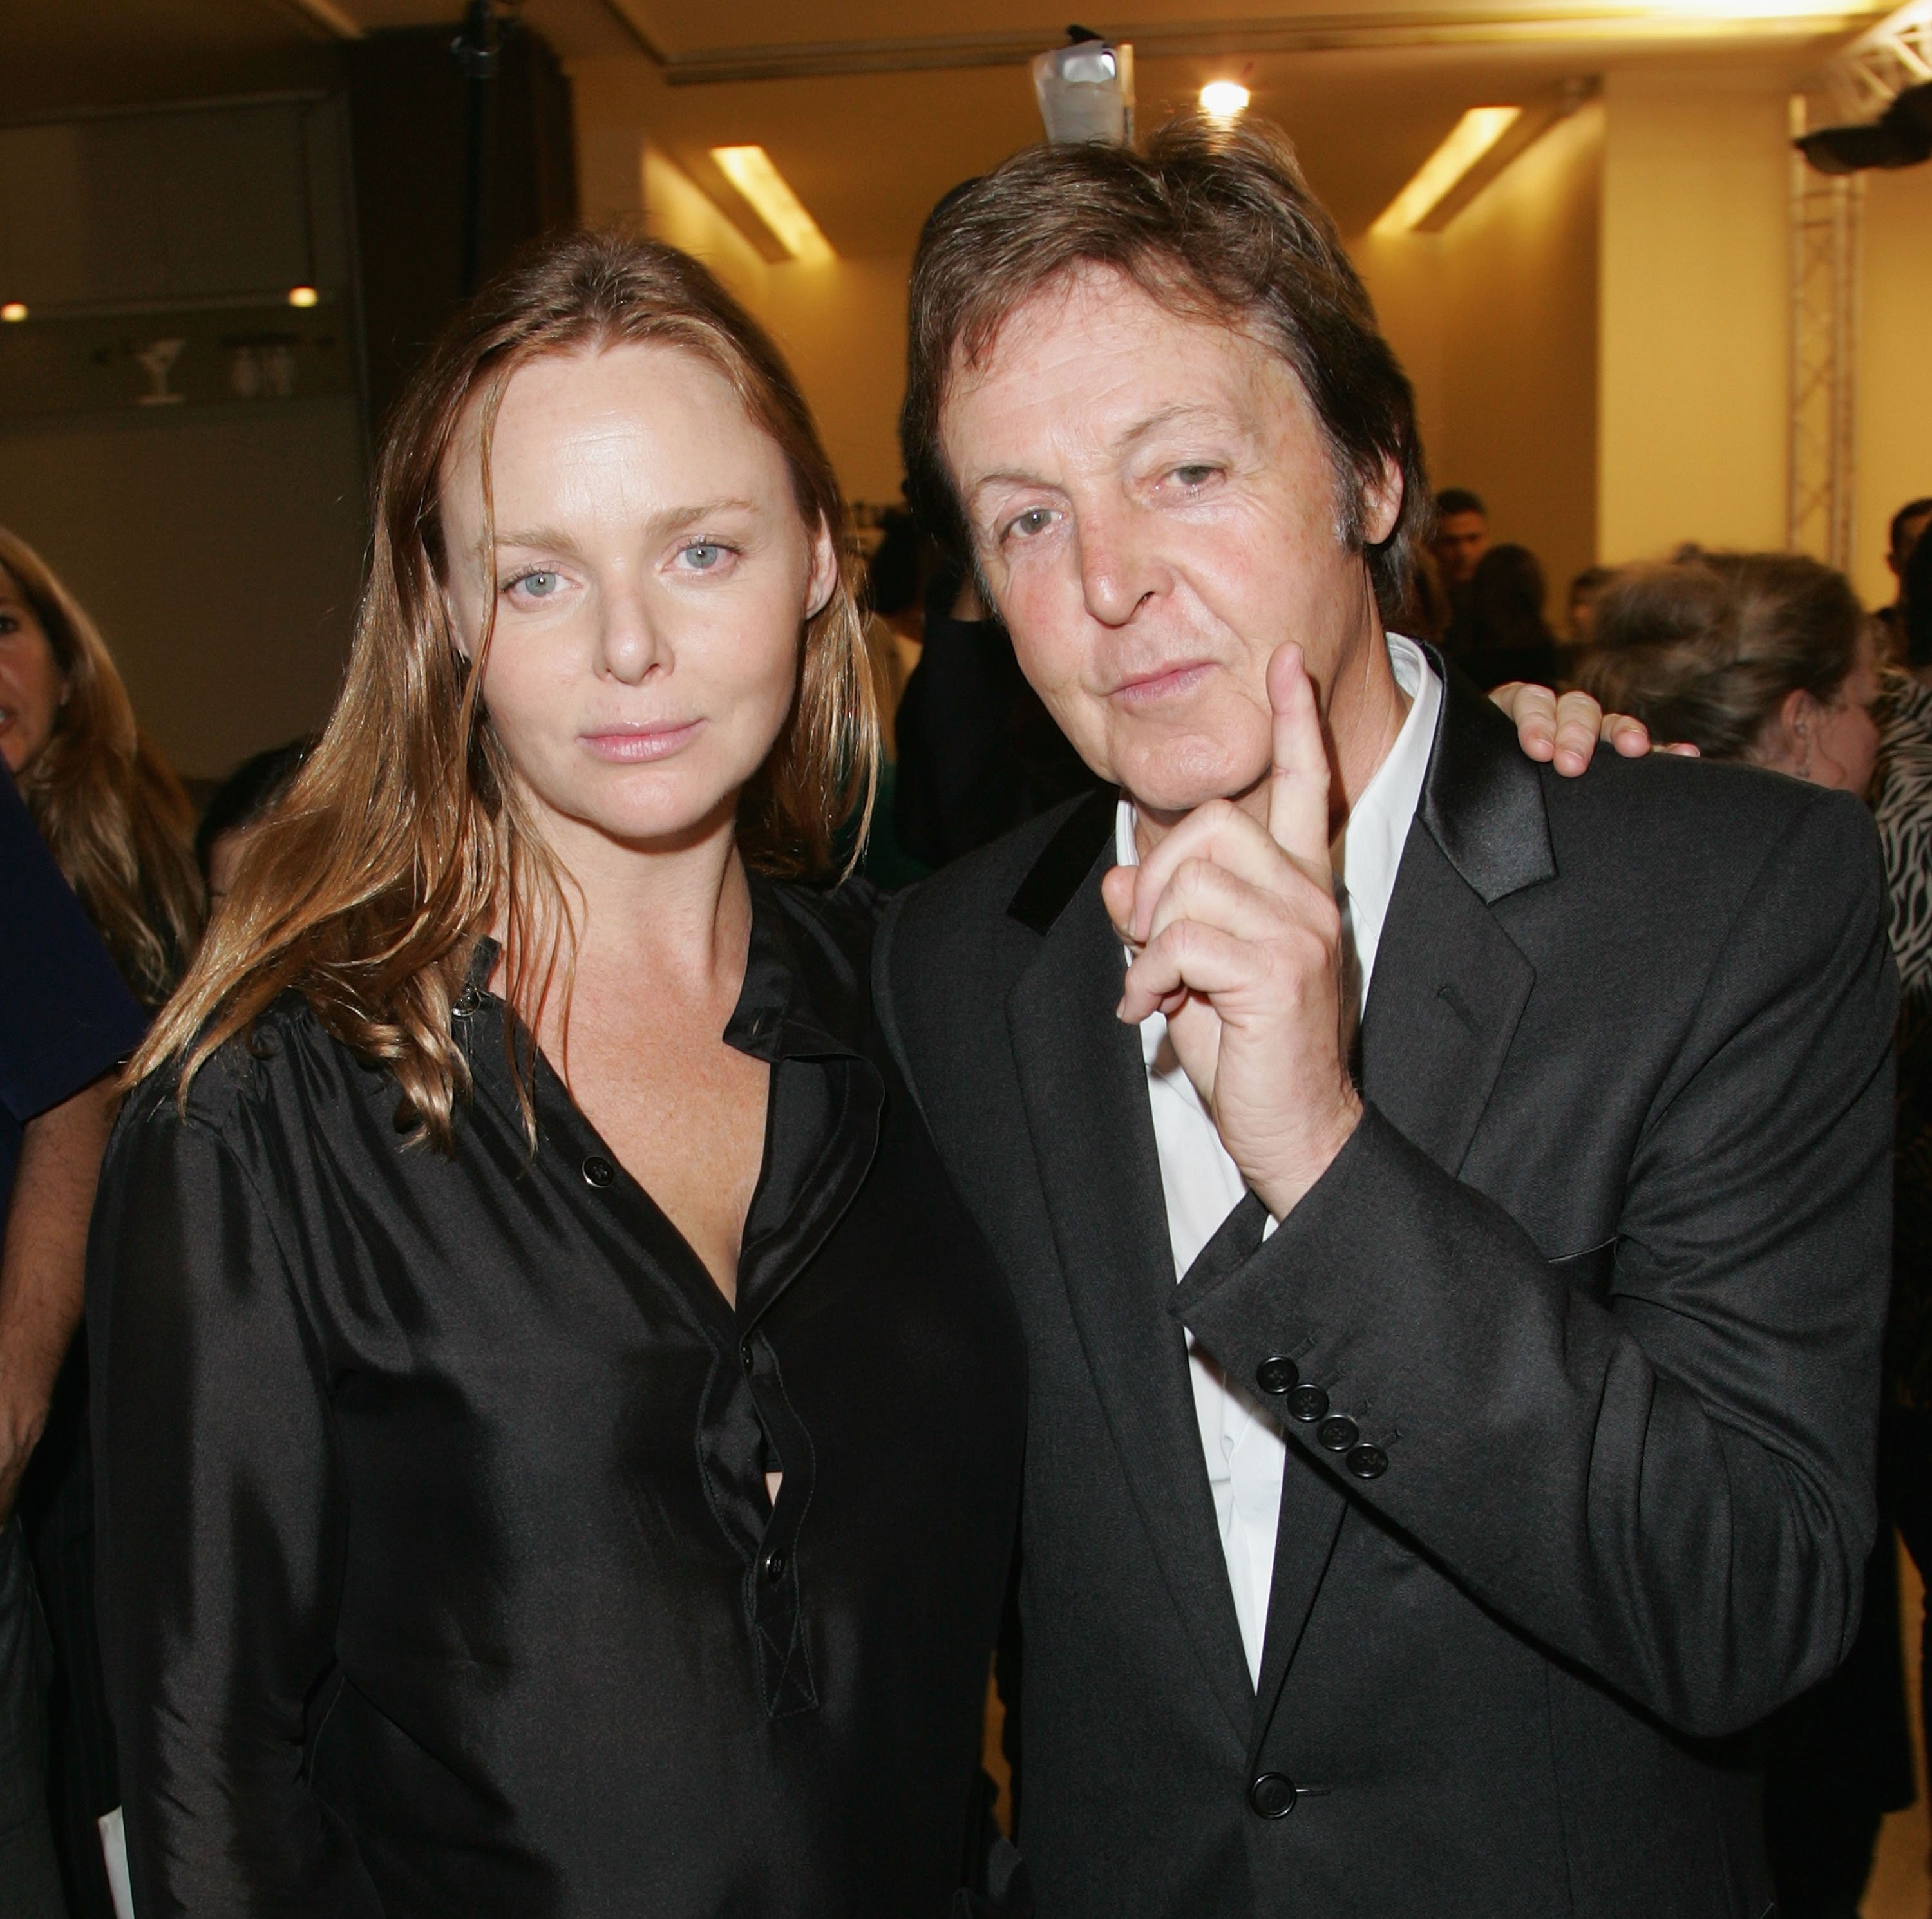 Stella McCartney stands with her arm over Paul McCartney's shoulder.